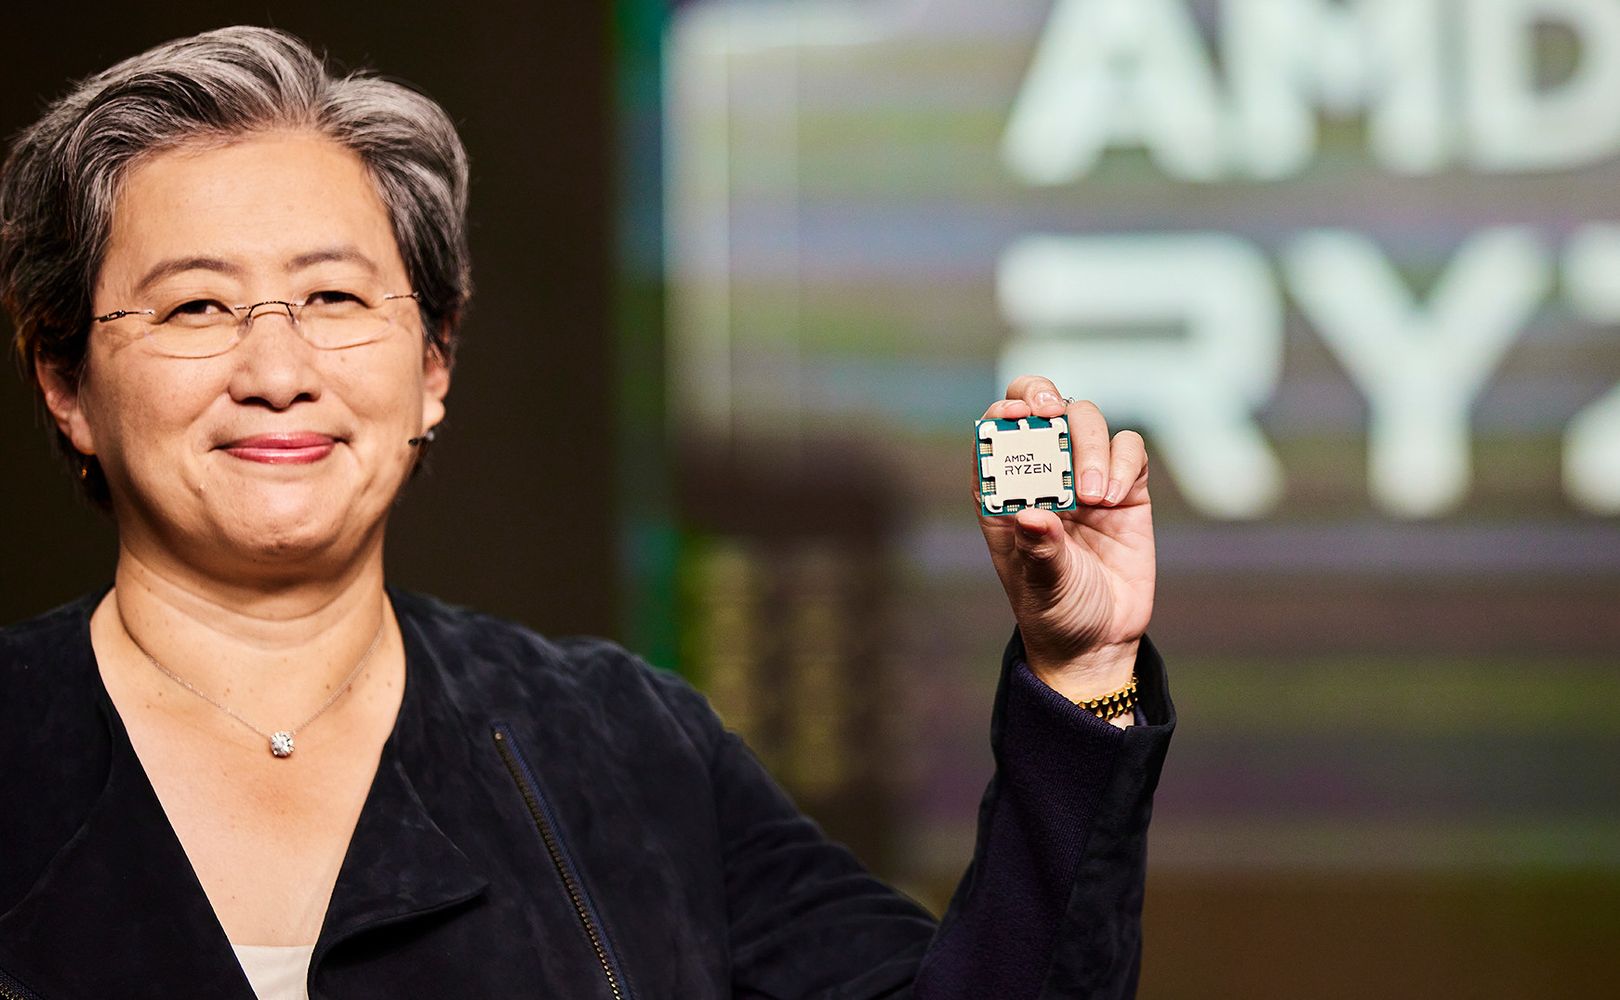 CES 2022: AMD Introduces New Ryzen 6000, RX 6000S and 6000M GPUs for Ultralight and Thin Laptops